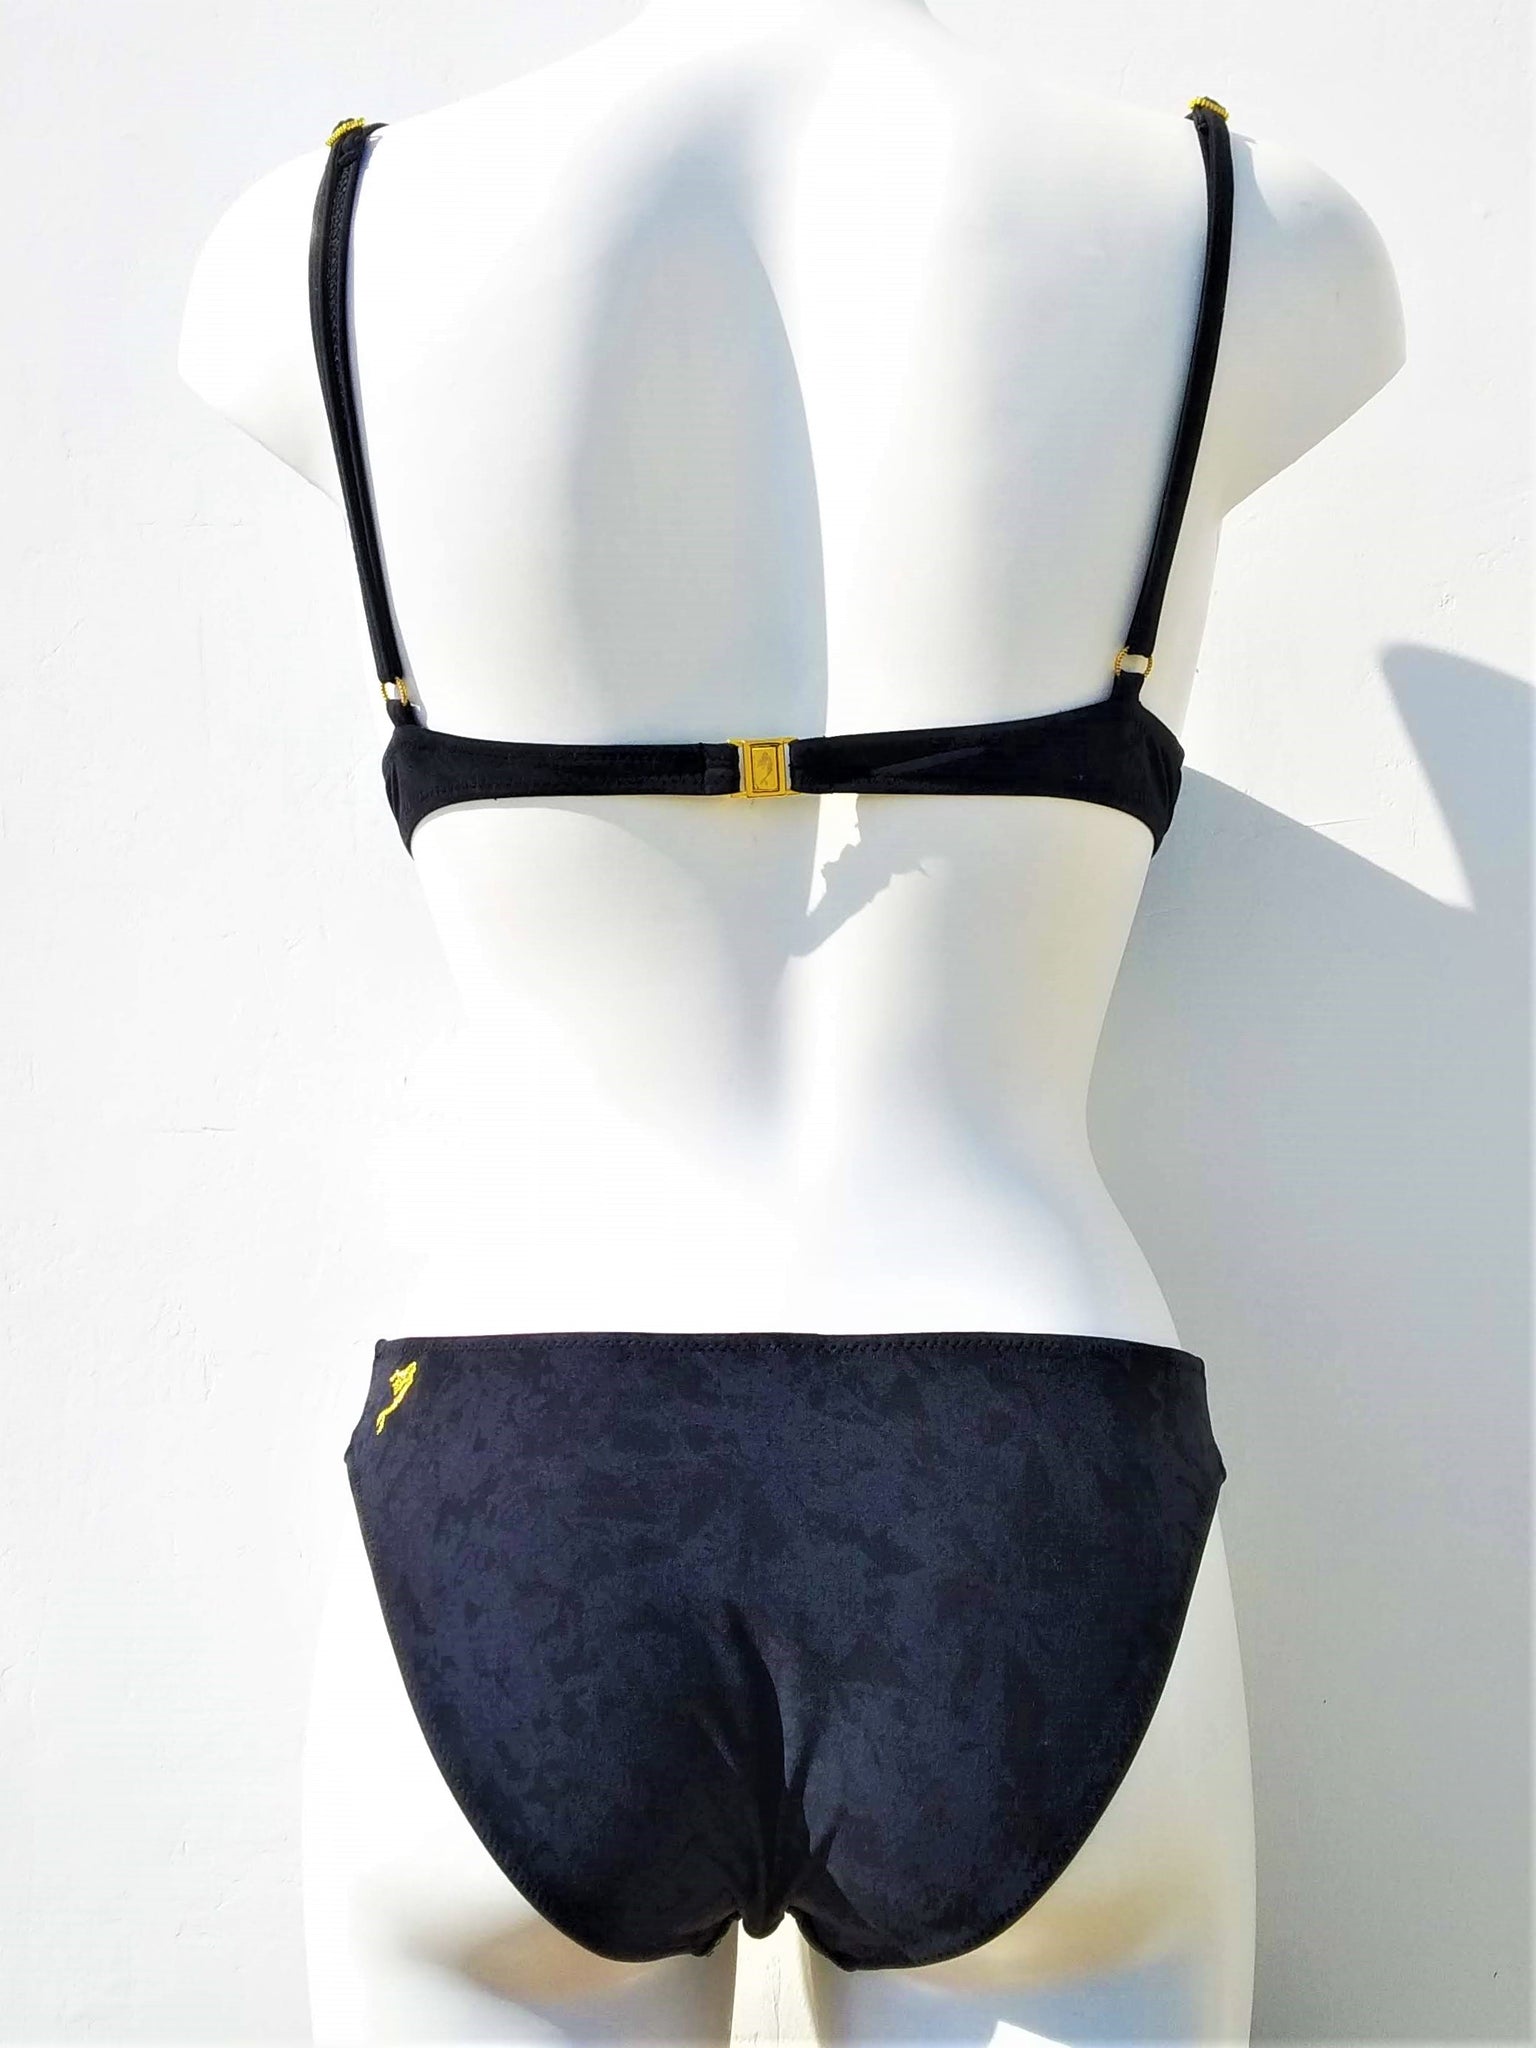 Back view of  Black bikini with double push-up bra, spaghetti straps and regular black bottom, with little mermaid embroidered in gold thread, as logo, on the side of the back band of the bra, and on the side of the back of the panties.. bikinn.com